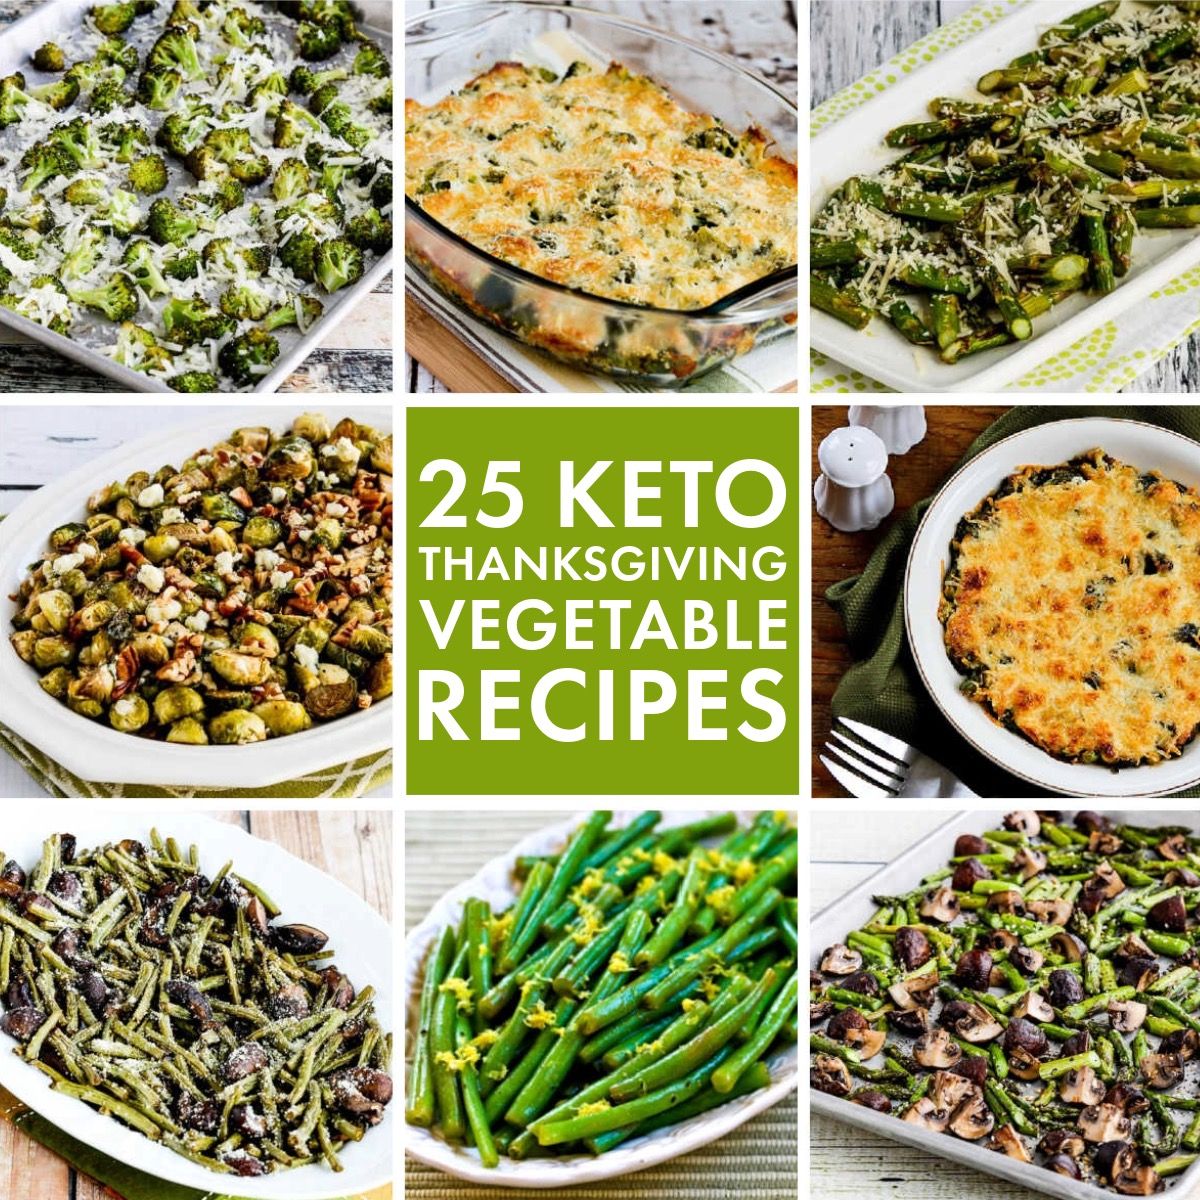 25 Keto Thanksgiving Vegetable Recipes text overlay collage of featured recipes.